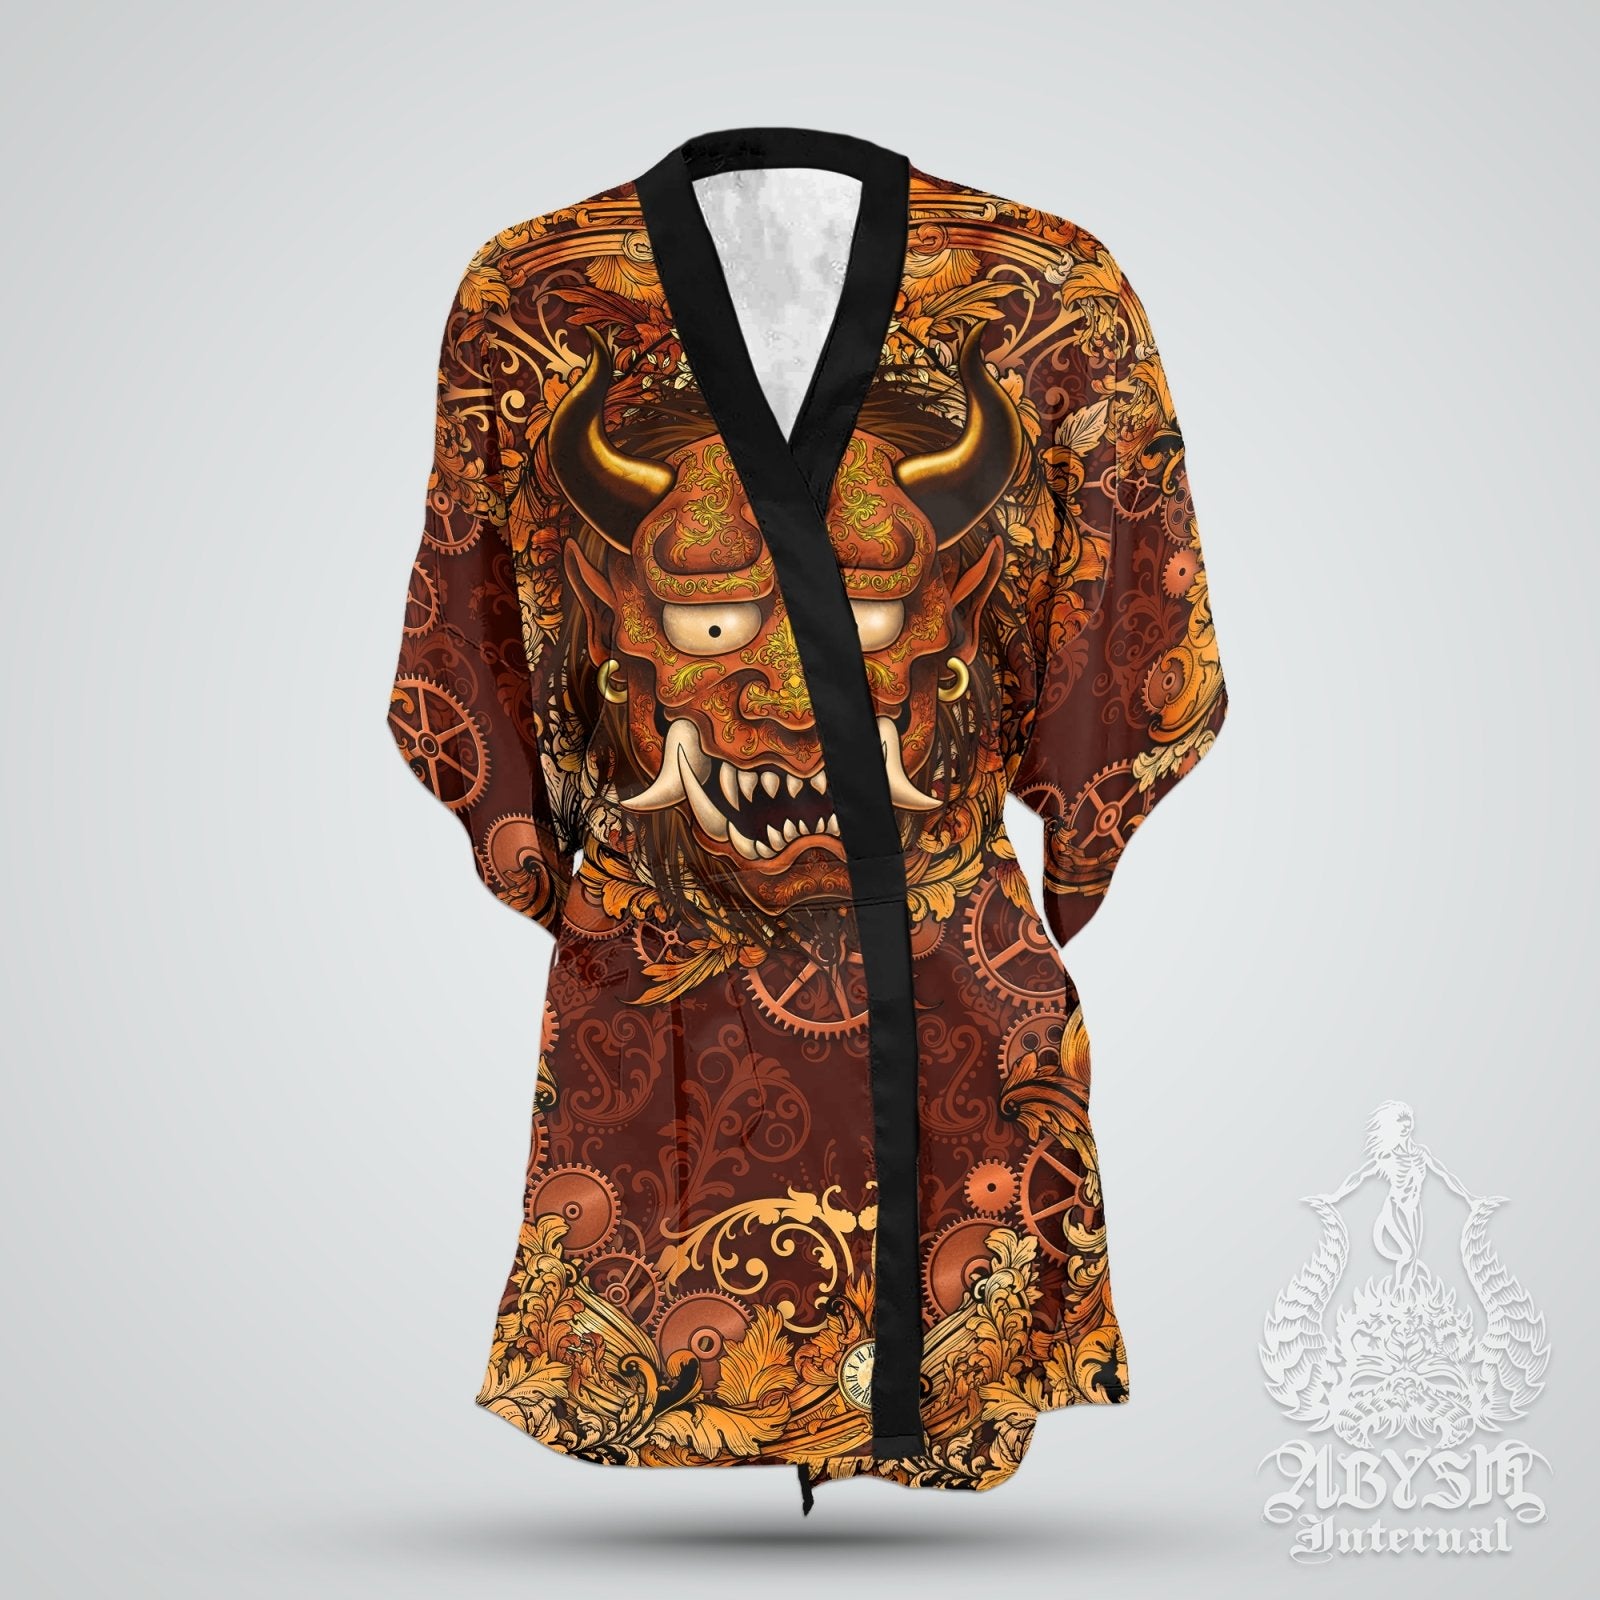 Demon Cover Up, Beach Outfit, Oni Party Kimono, Japanese Summer Festival Robe, Indie and Alternative Clothing, Unisex - Steampunk - Abysm Internal